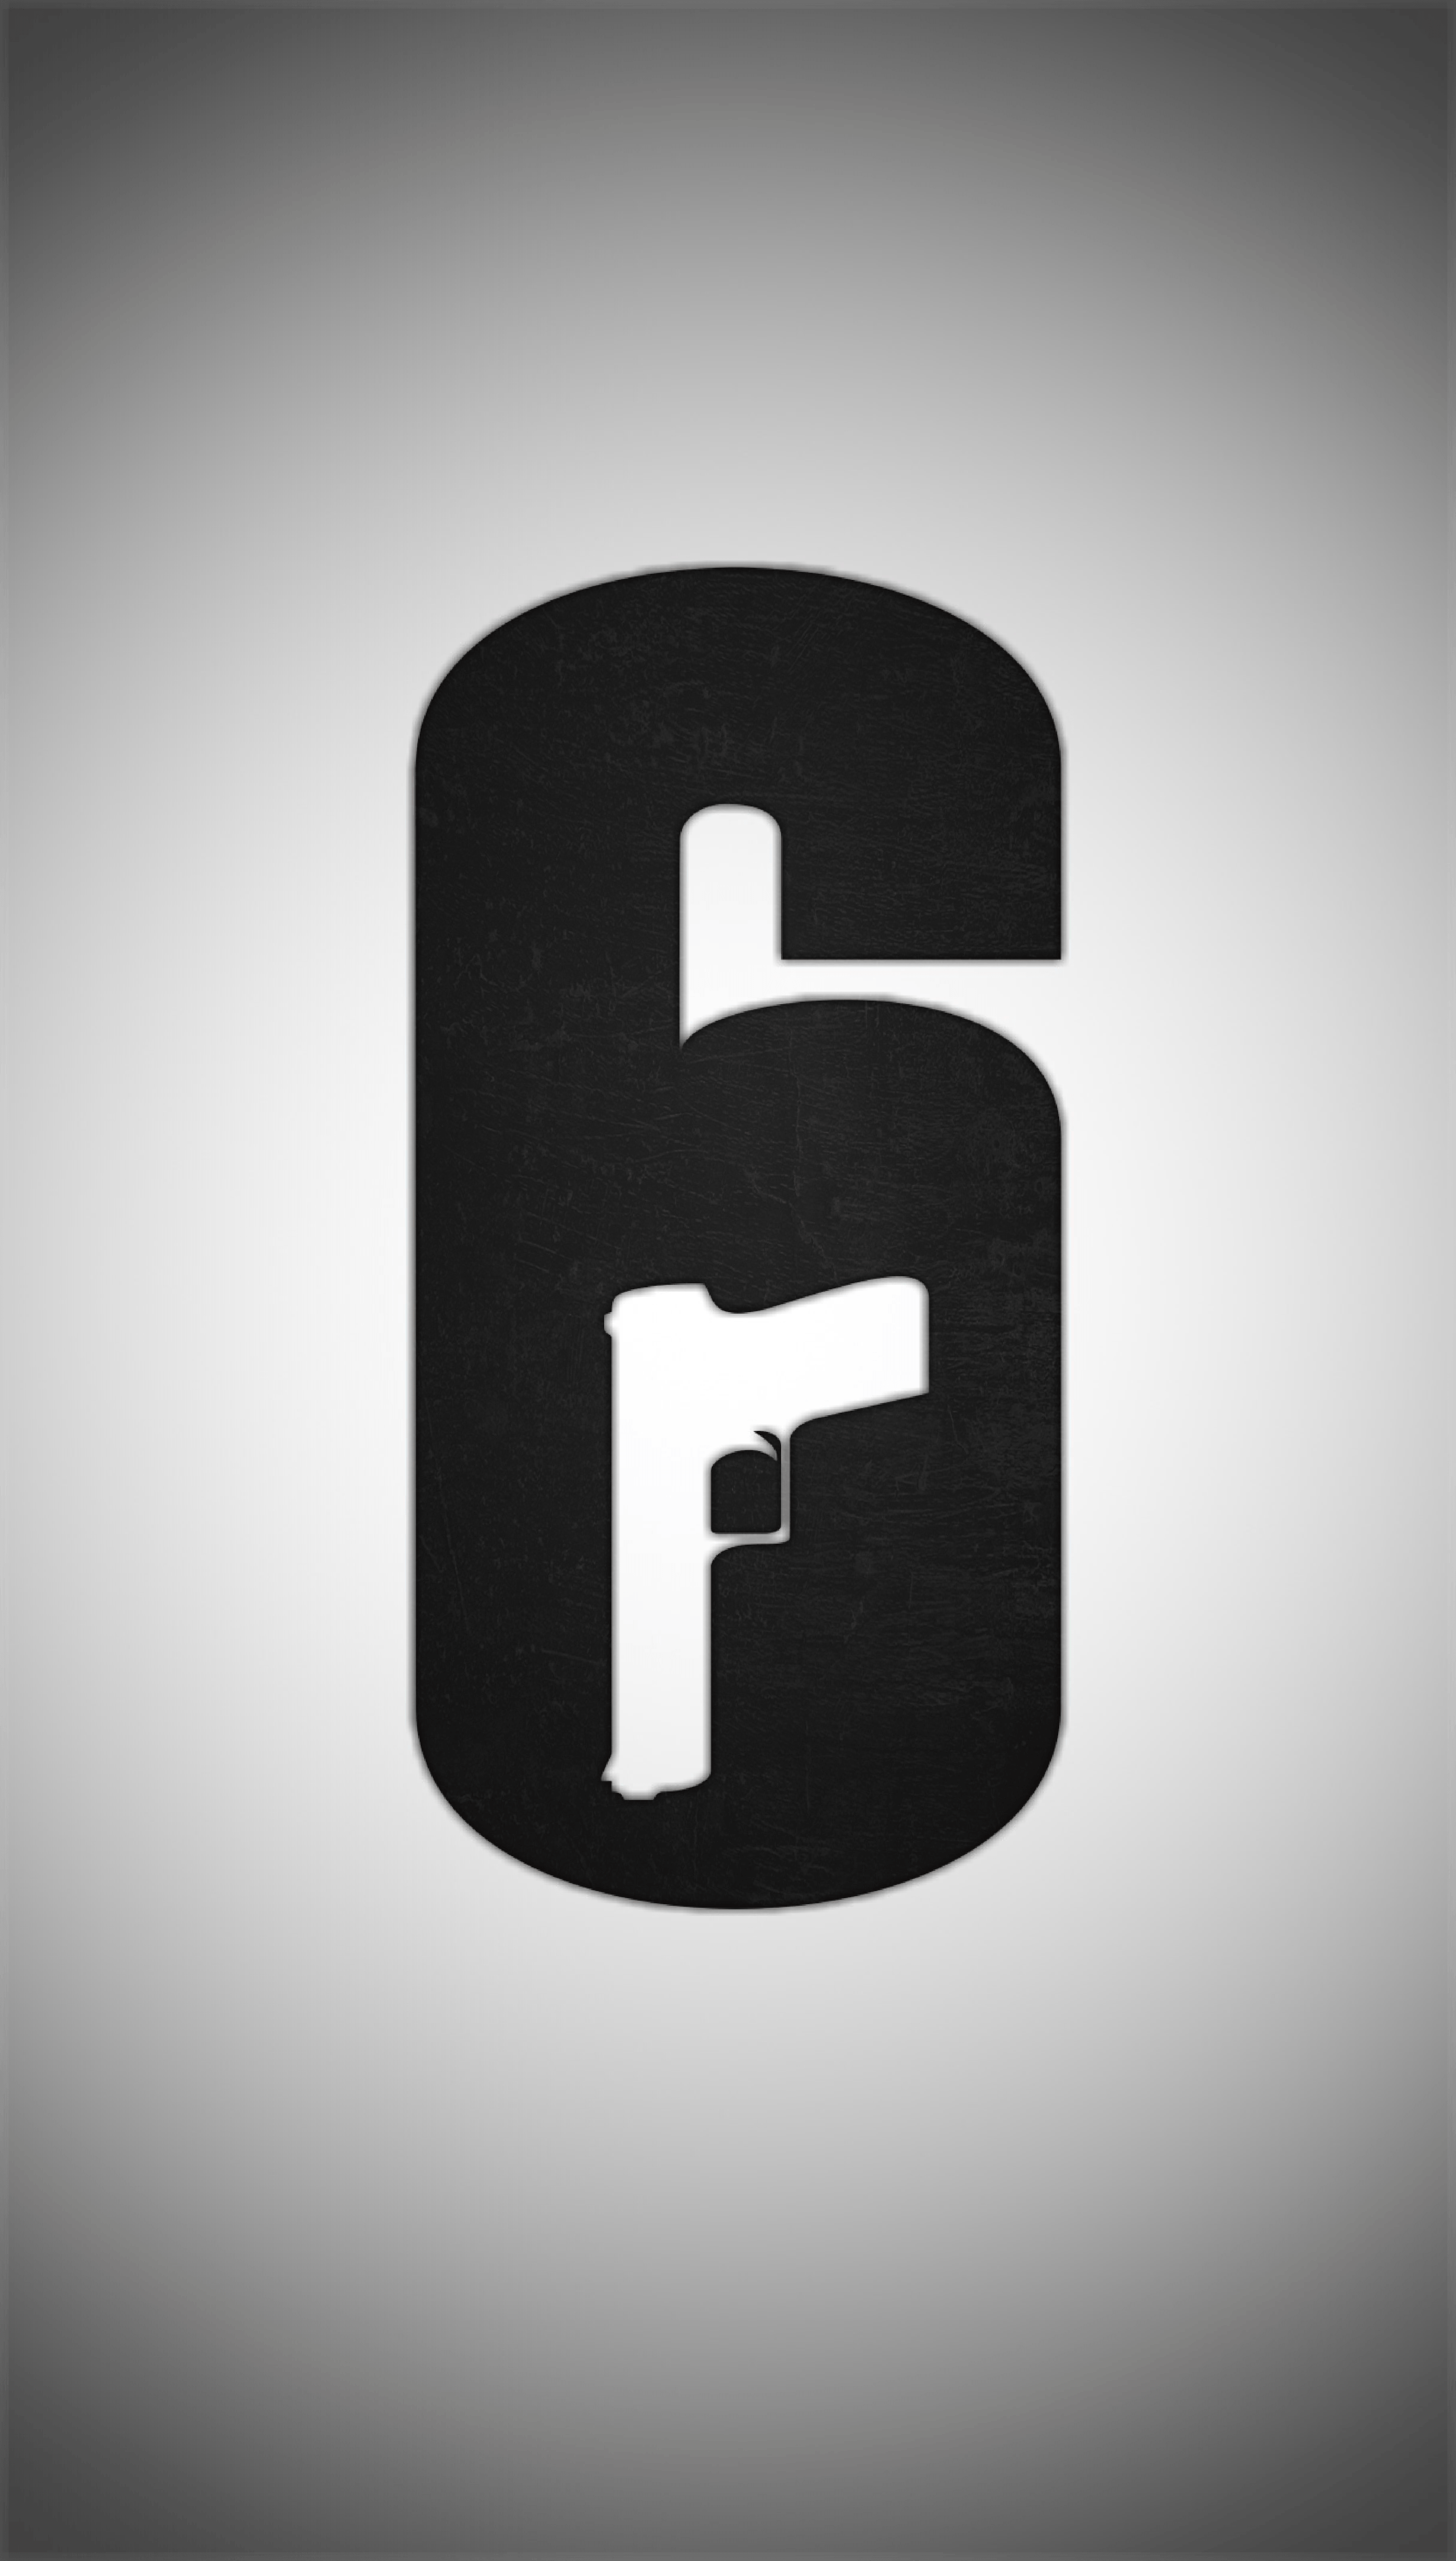 Rainbow 6 Logo - Rainbow Six: Siege Logo Mobile Wallpapers (Textures, Flags and Camos ...